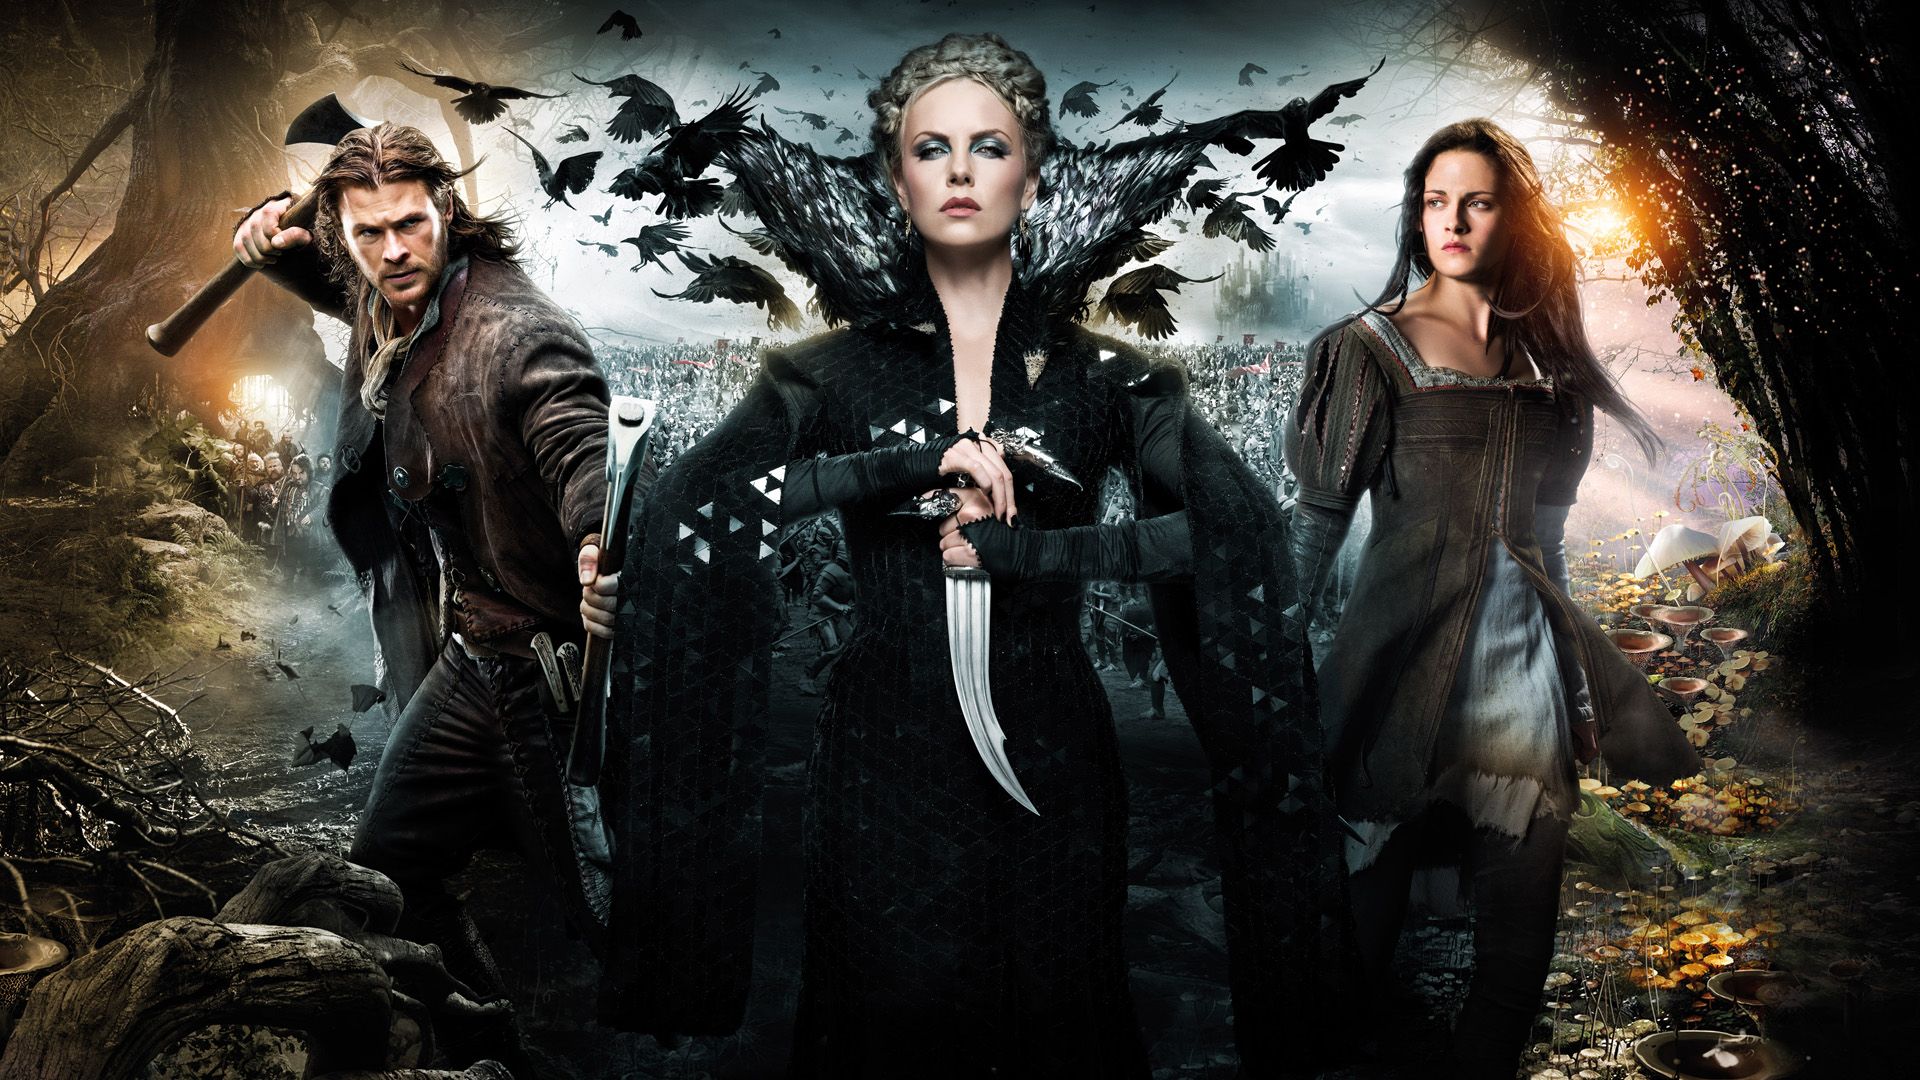 Snow White and the Huntsman background